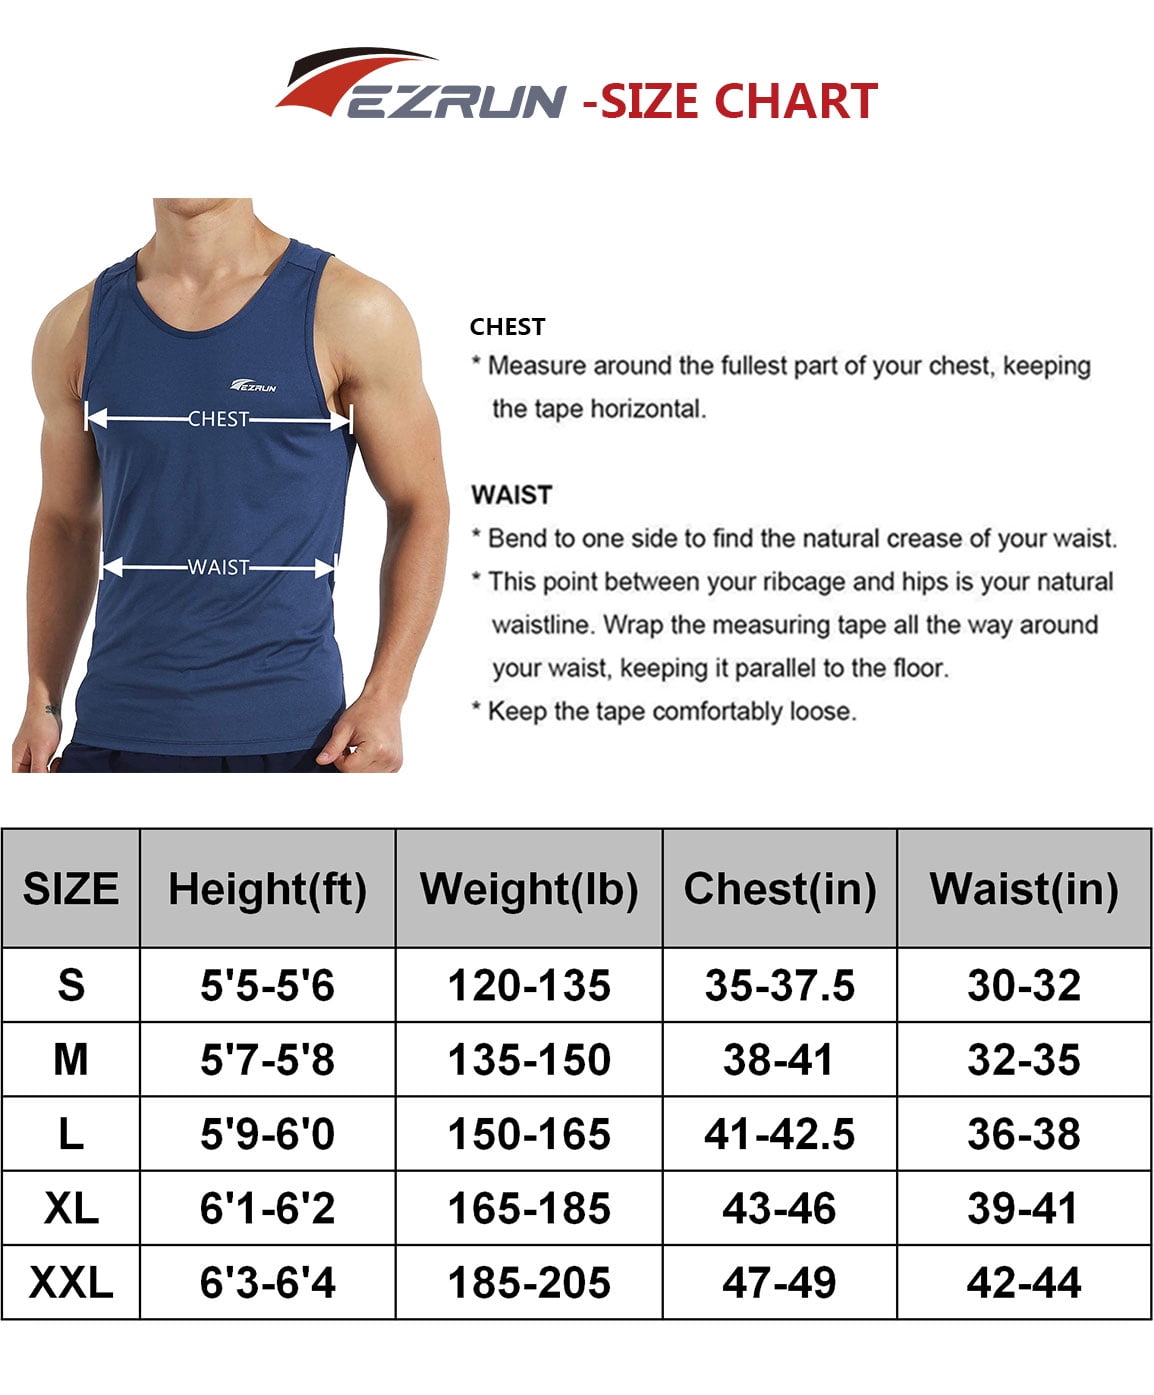 EZRUN Men's Quick Dry Sport Tank Top for Bodybuilding Gym Athletic Jogging  Running,Fitness Training Workout Sleeveless Shirts